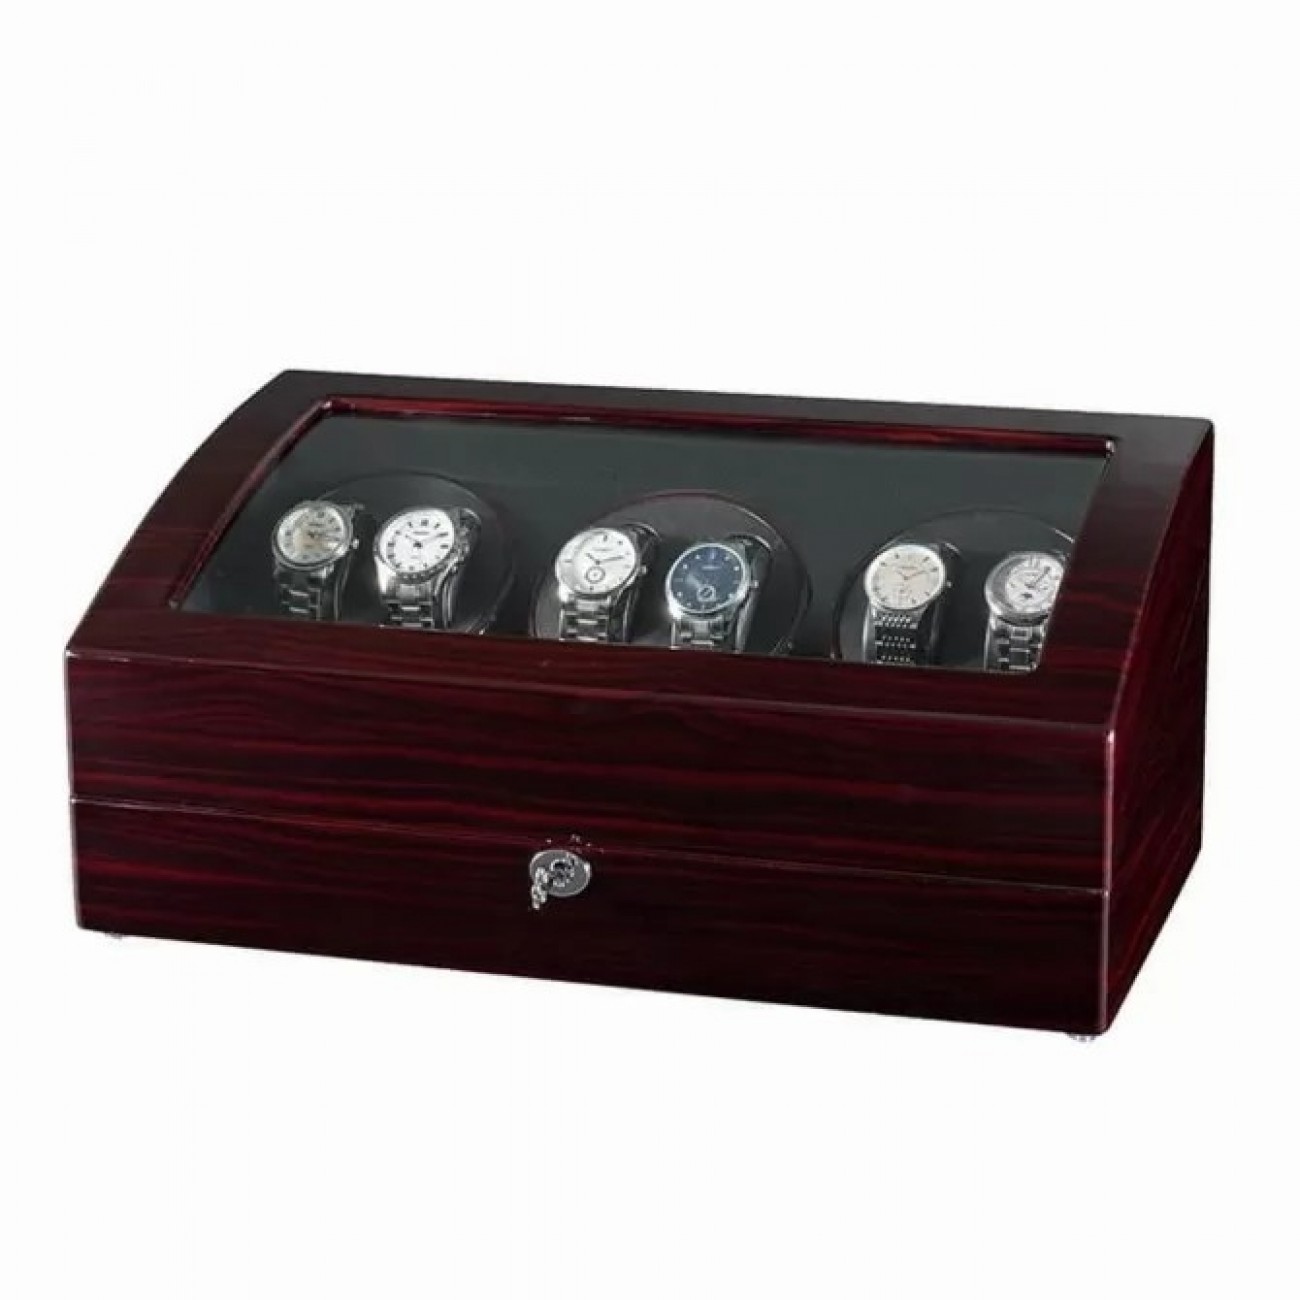 Watch Storage Box Organiser 12 Slots with Additional Drawer for Storag